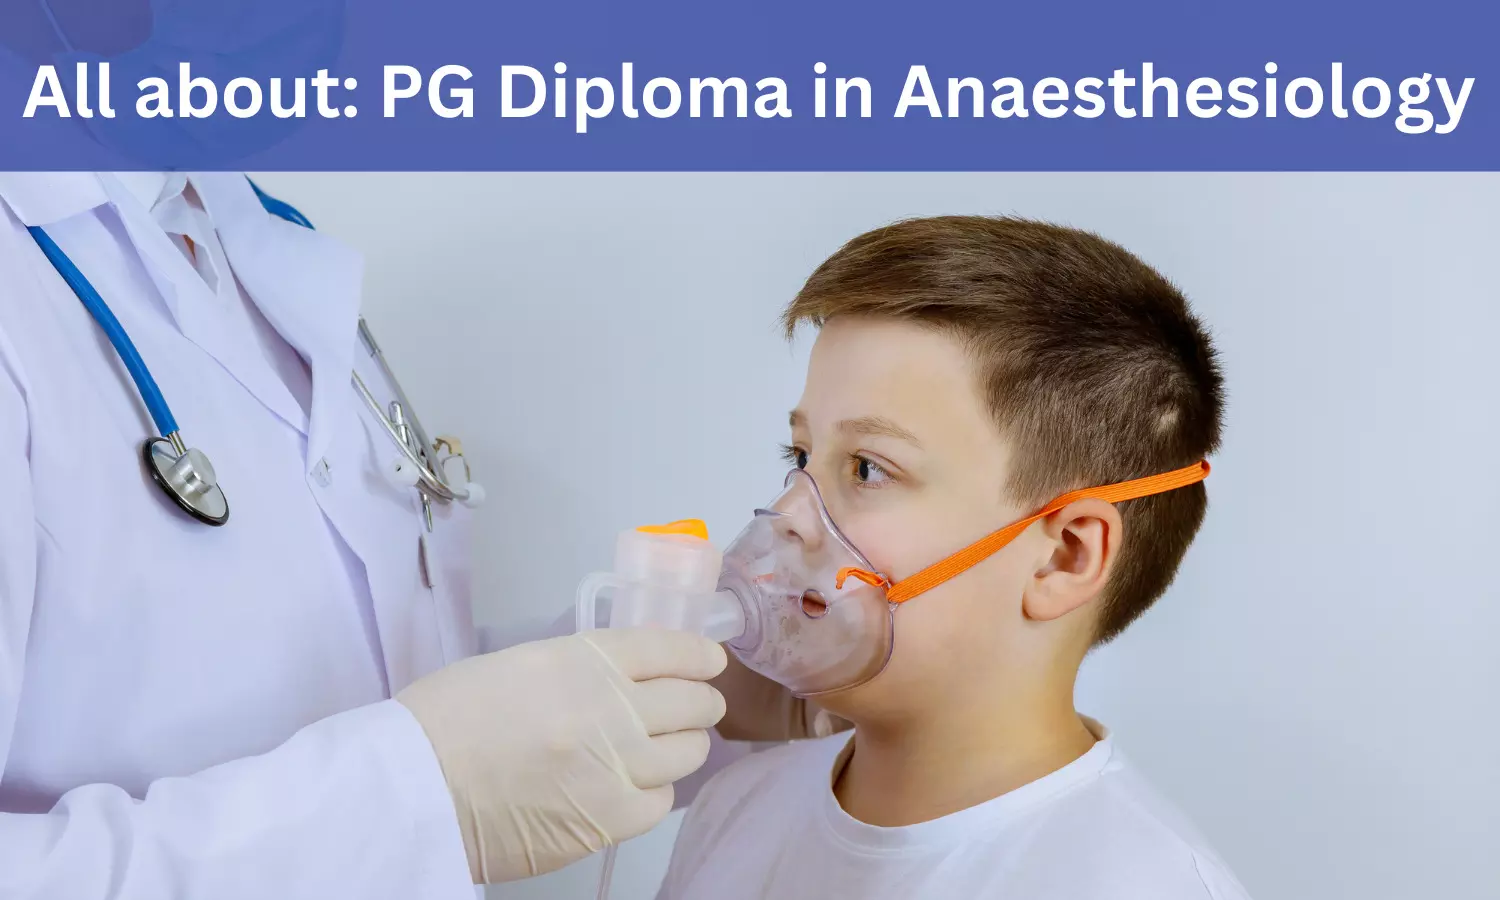 PG Diploma in Anaesthesiology: Admission, Medical Colleges, Fee, Eligibility criteria, syllabus details here